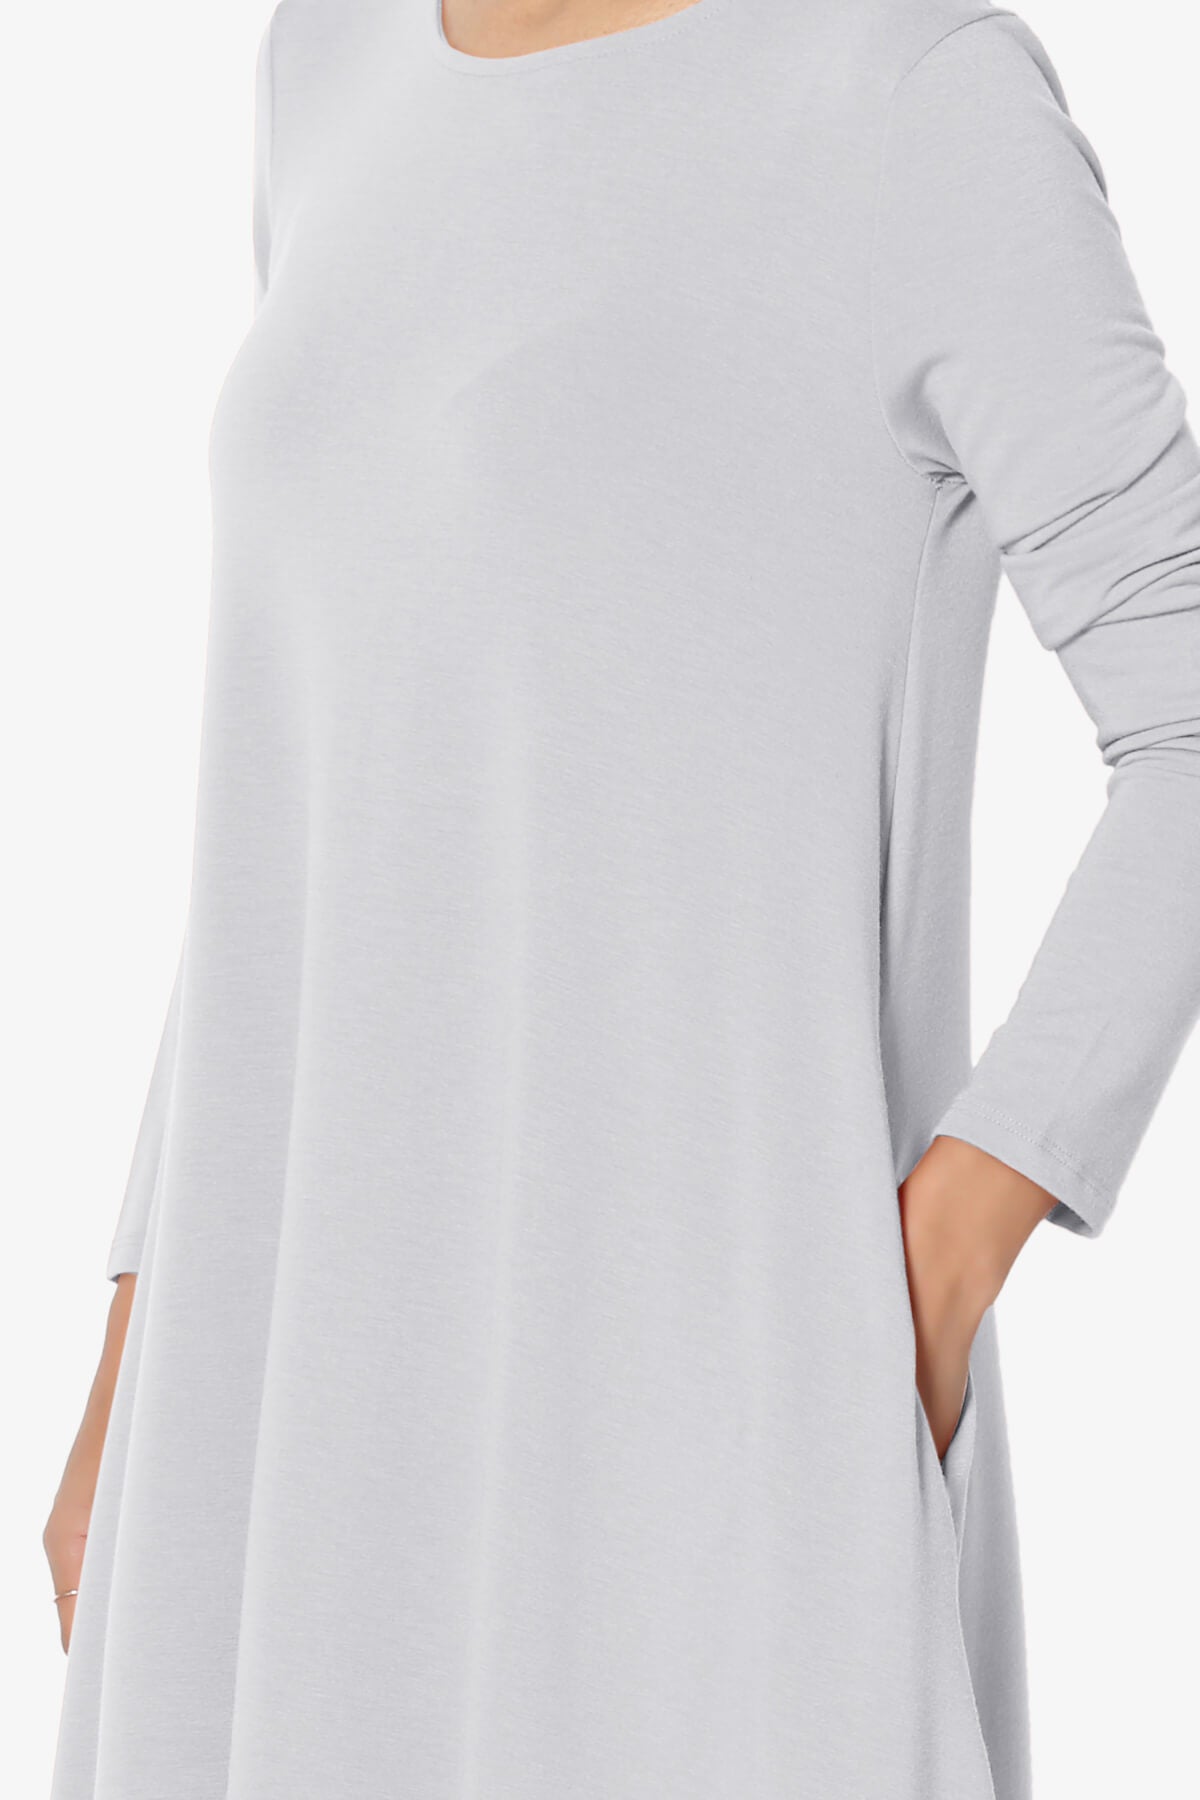 Load image into Gallery viewer, Squish Pocket Long Sleeve T-Shirt Dress GREY MIST_5
